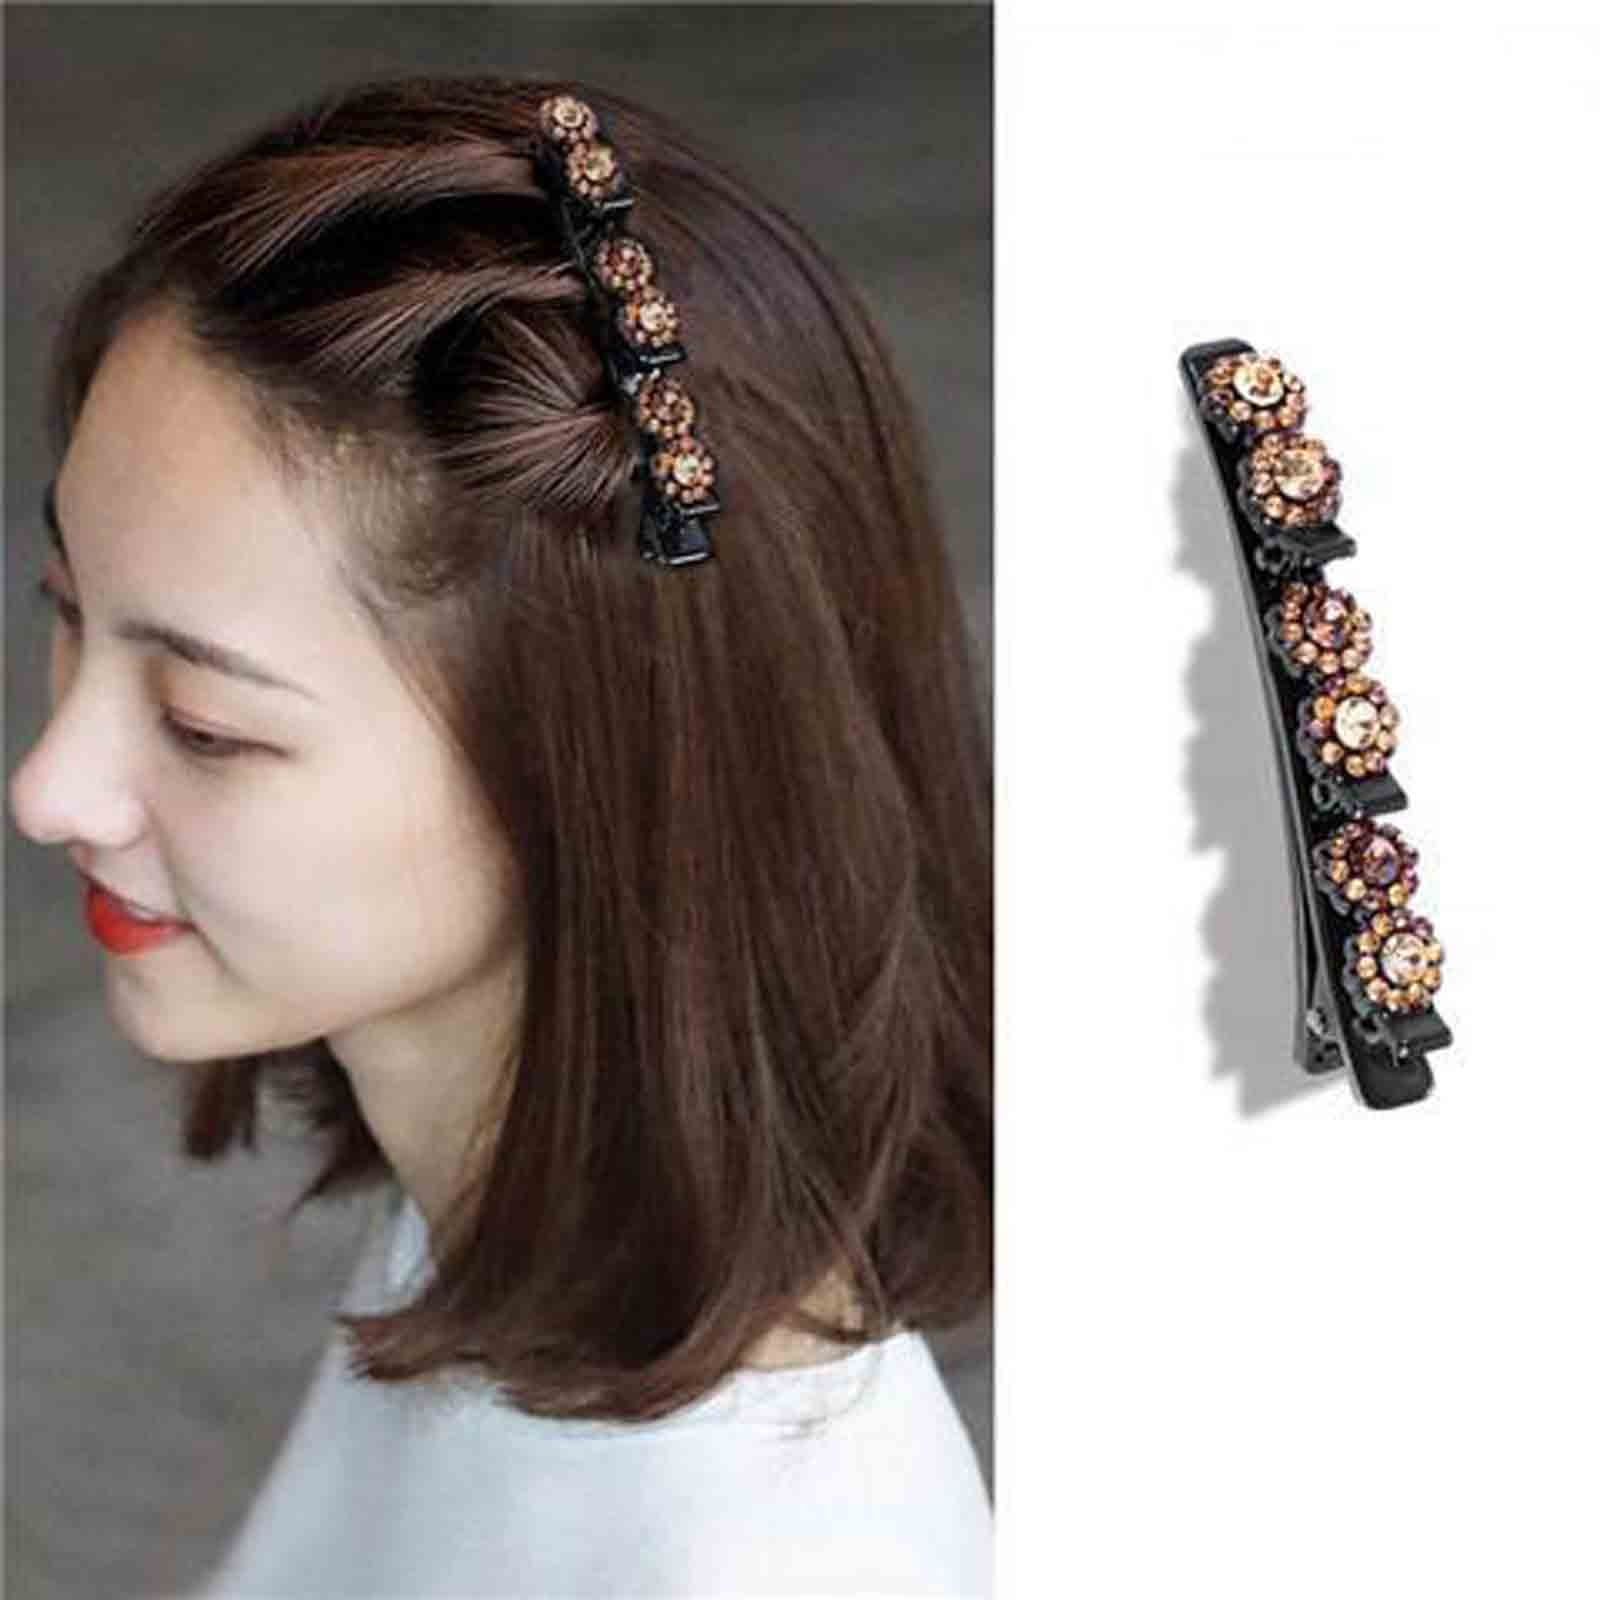 Hair Clips for Girls 8-12 20pcs Metal Barrettes Snap Hair Clips